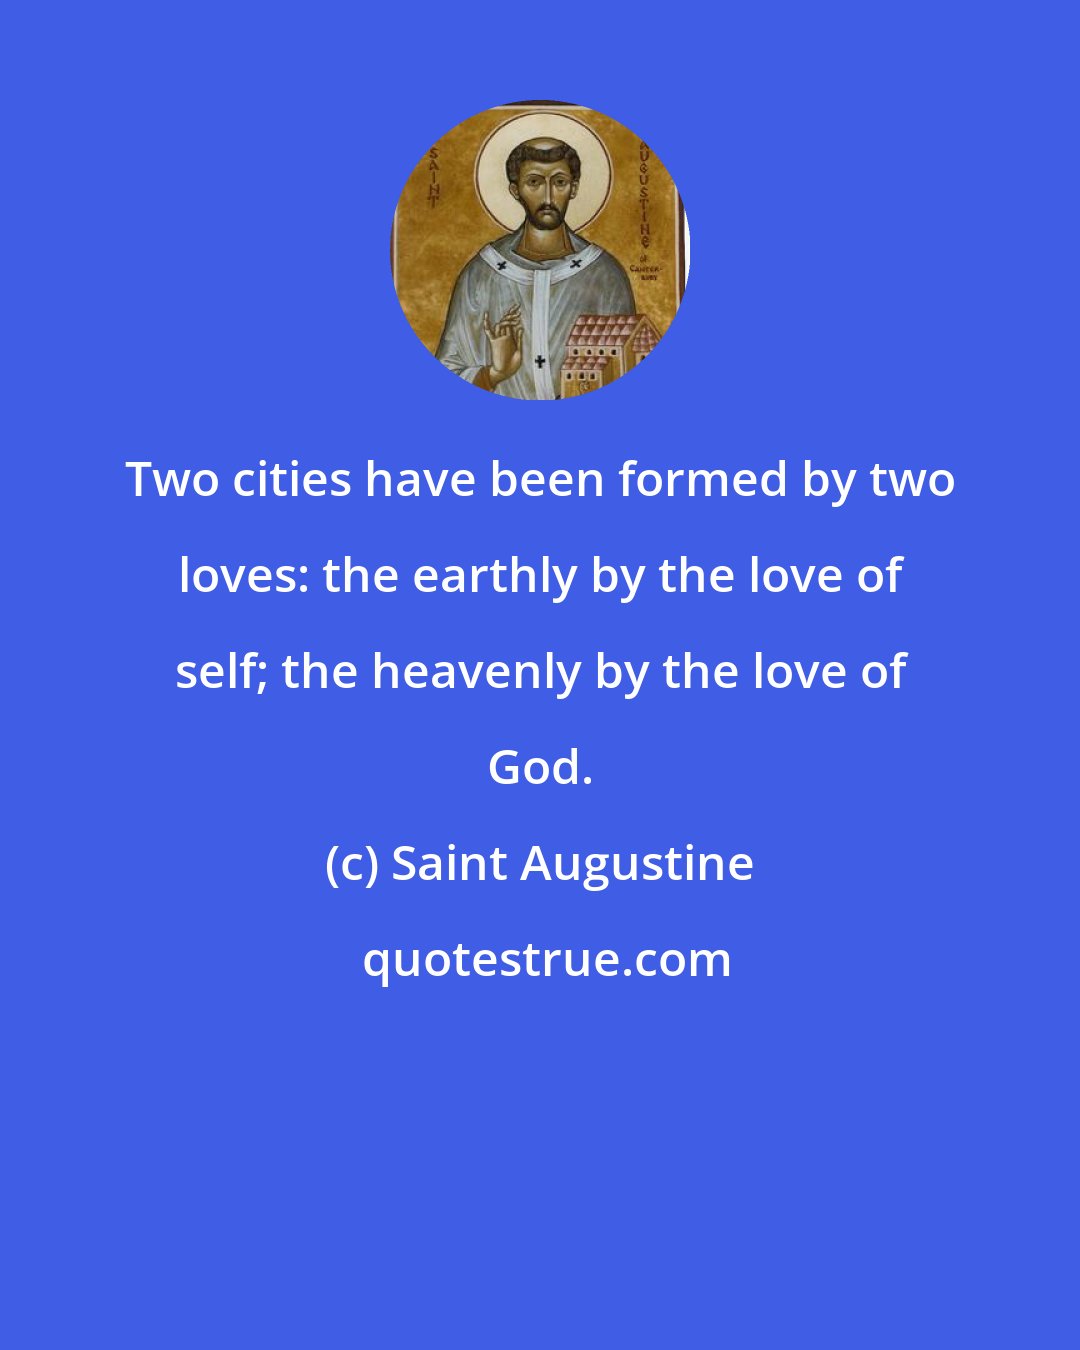 Saint Augustine: Two cities have been formed by two loves: the earthly by the love of self; the heavenly by the love of God.